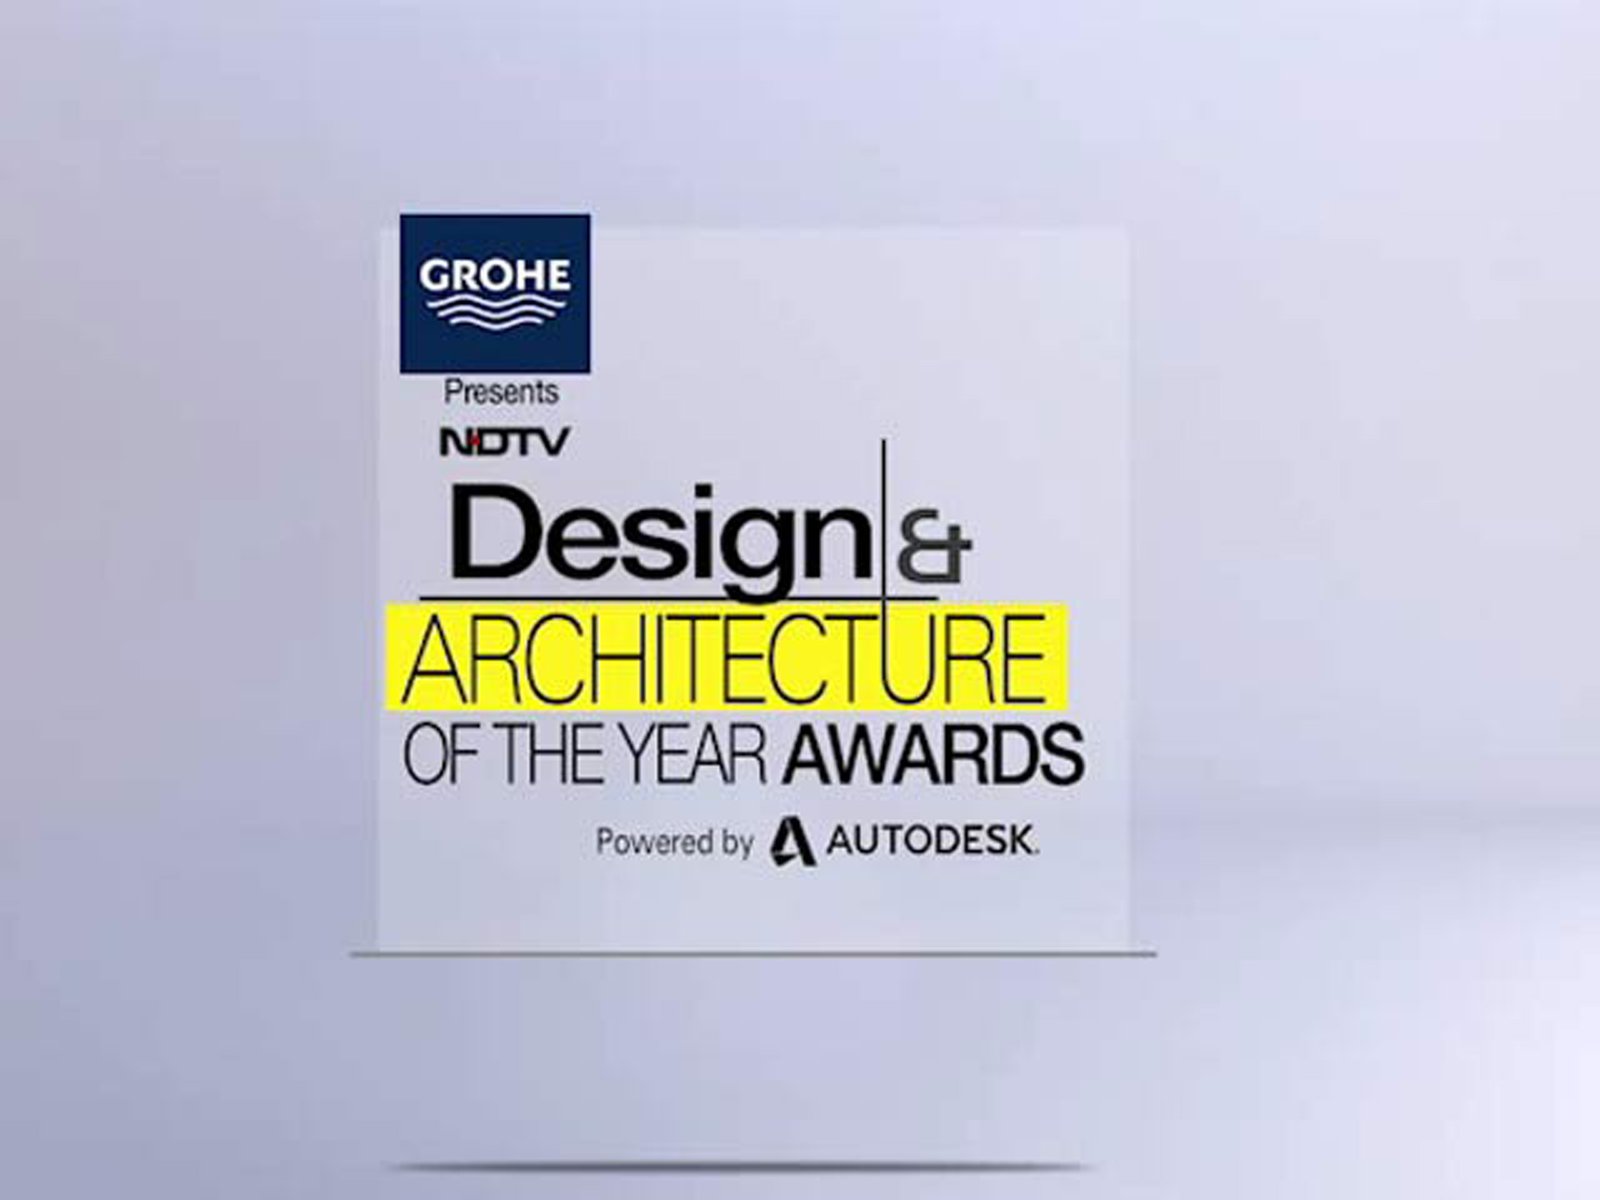 ndtv design and architecture of the year awards